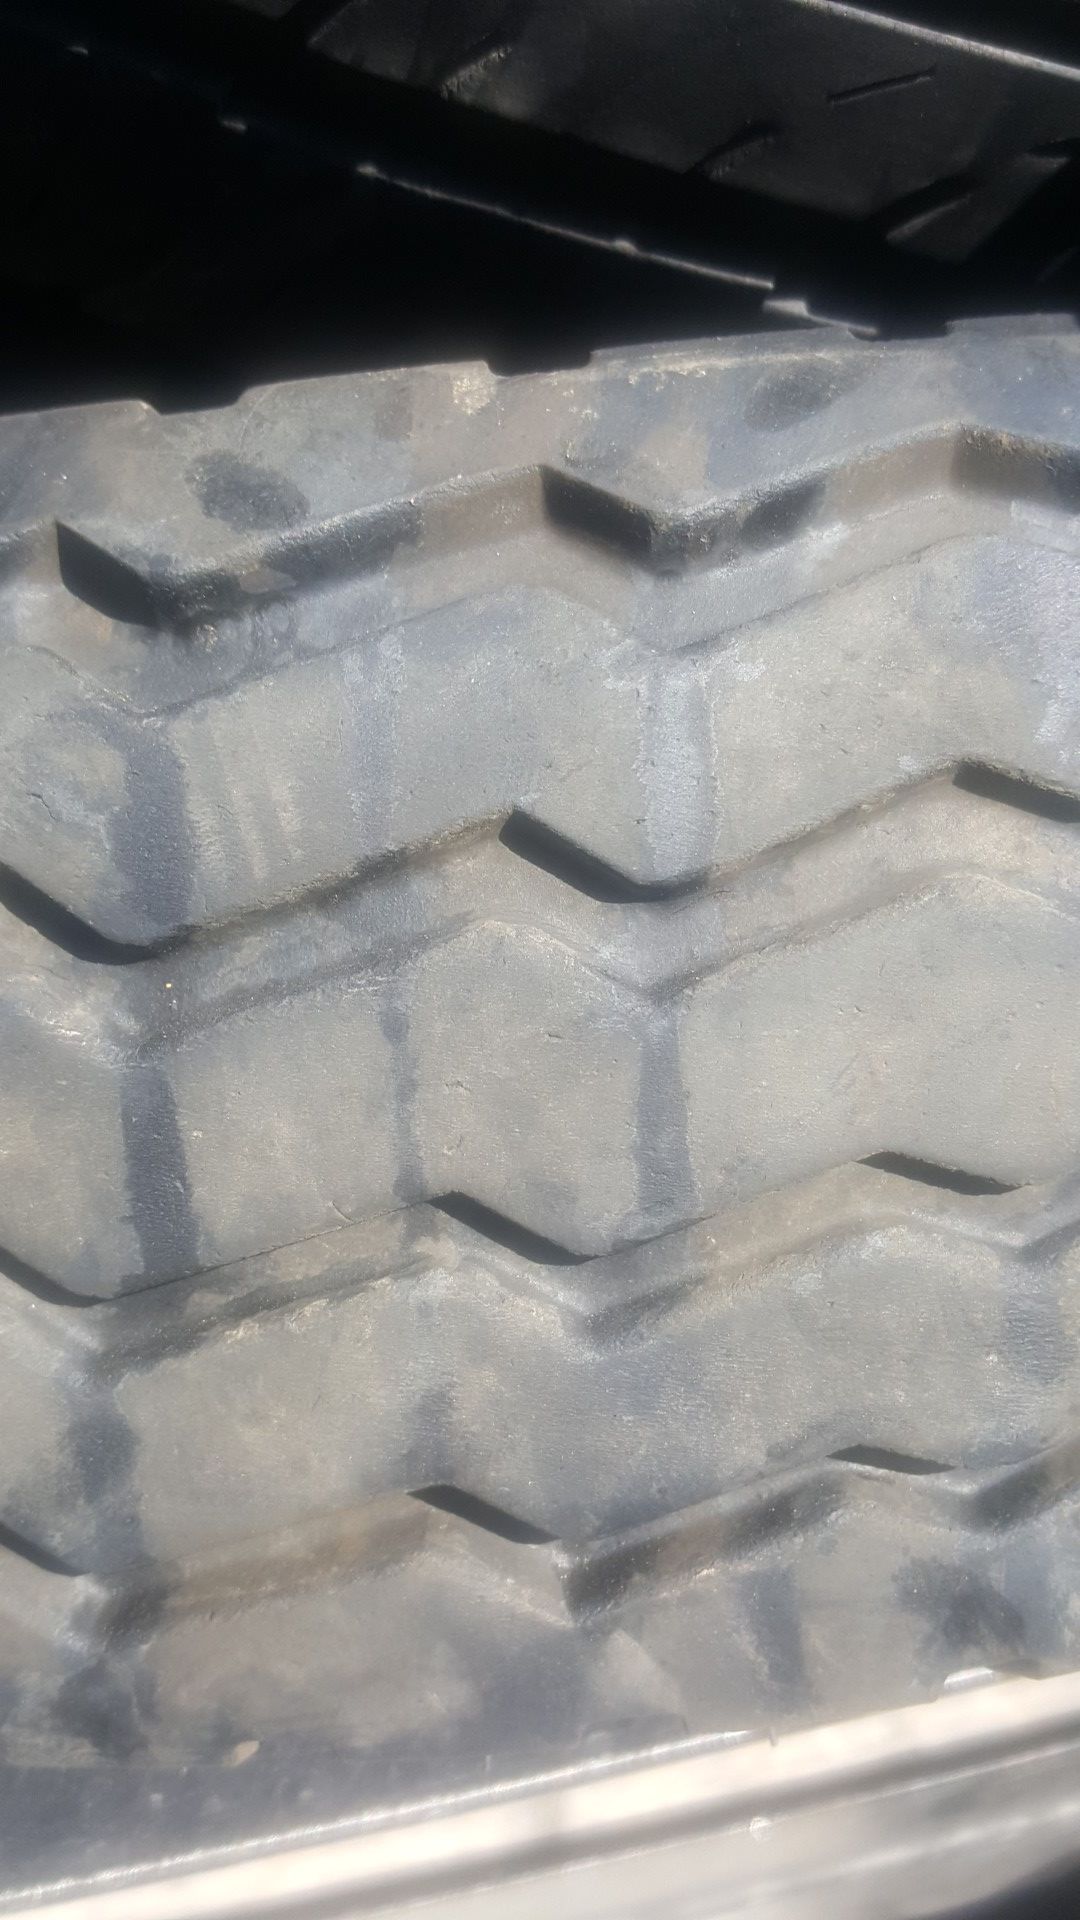 205 75 14 st trailer tires .less then year old .60 tires left 50.00 A SET OF 4 ...4 TIRES MIN.